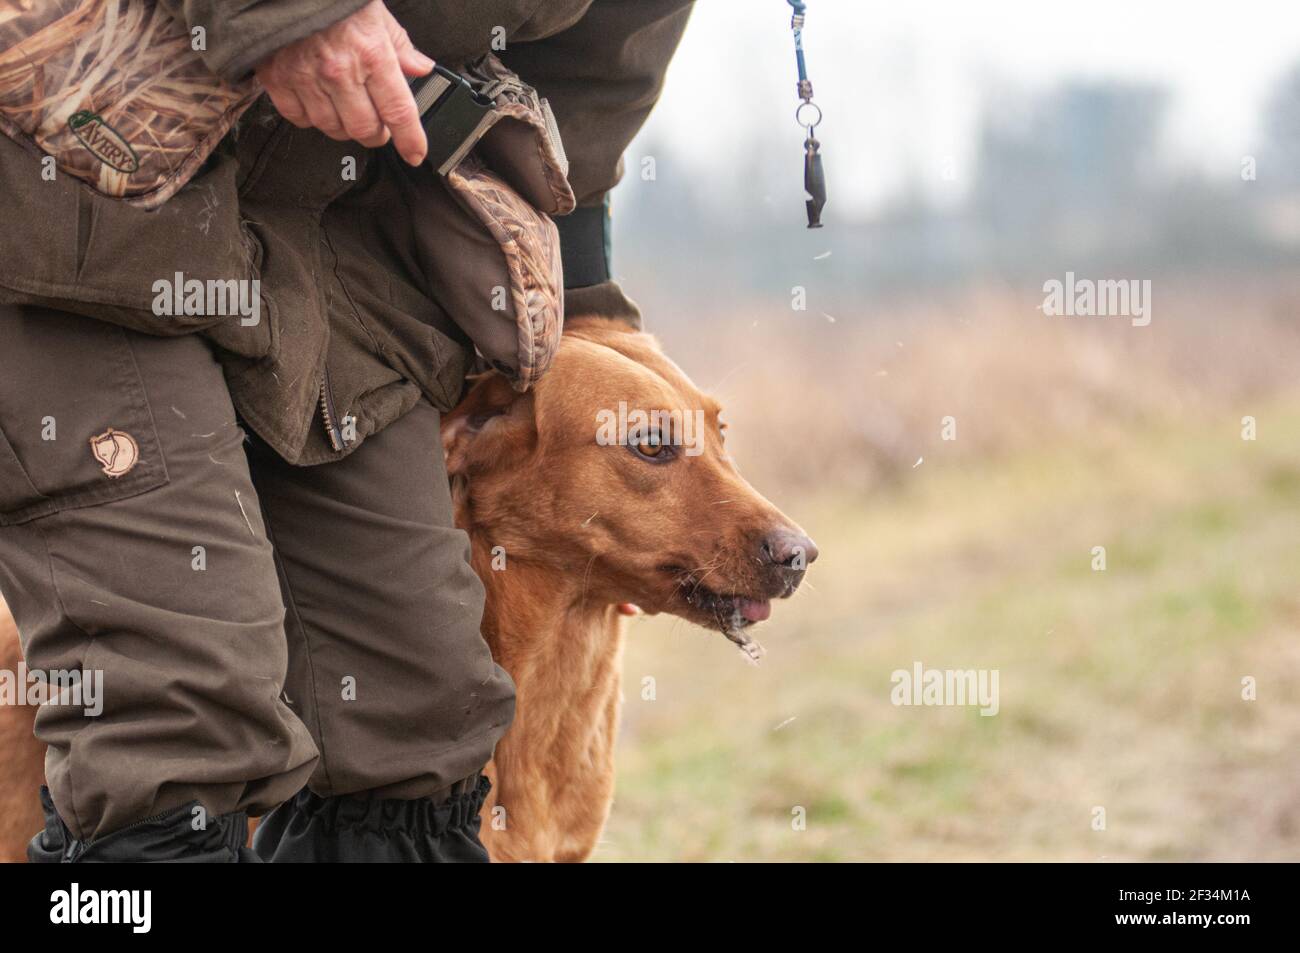 Red fox Labrador Retriever is spitting pheasant feathers. The dog trainer is petting the dog Stock Photo